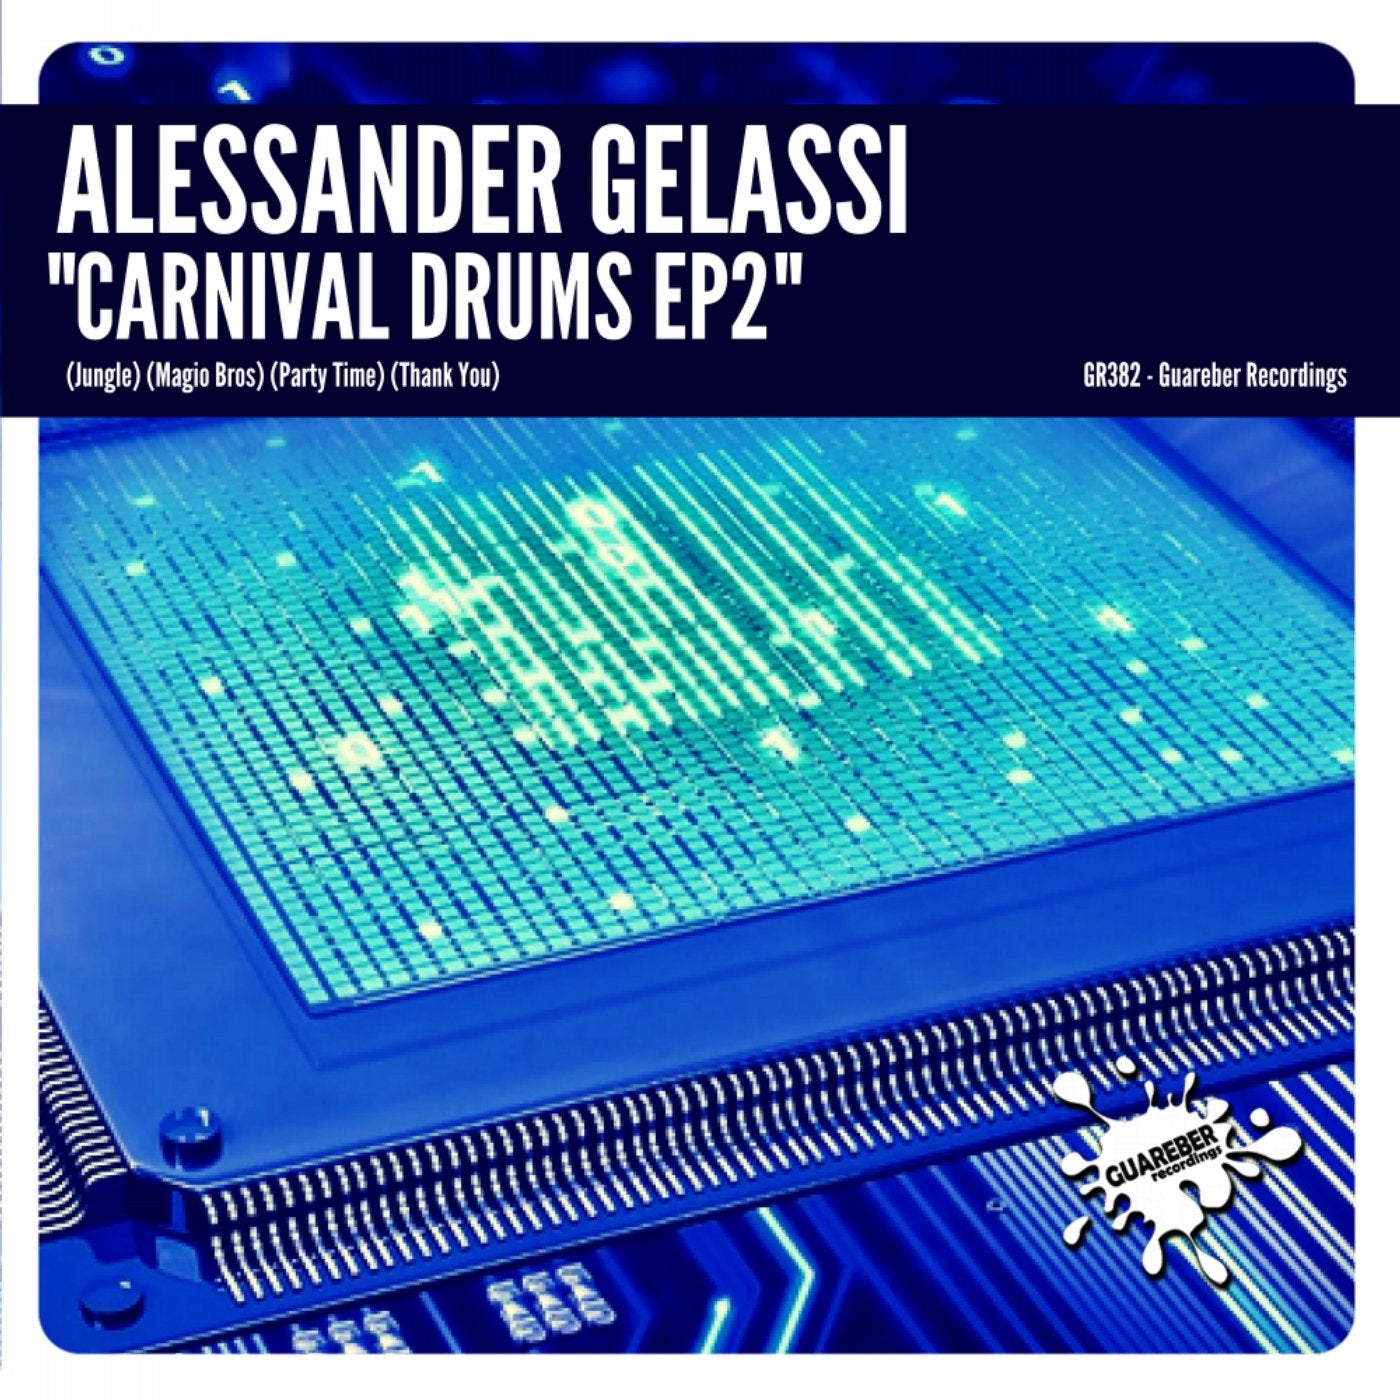 Carnival Drums EP2